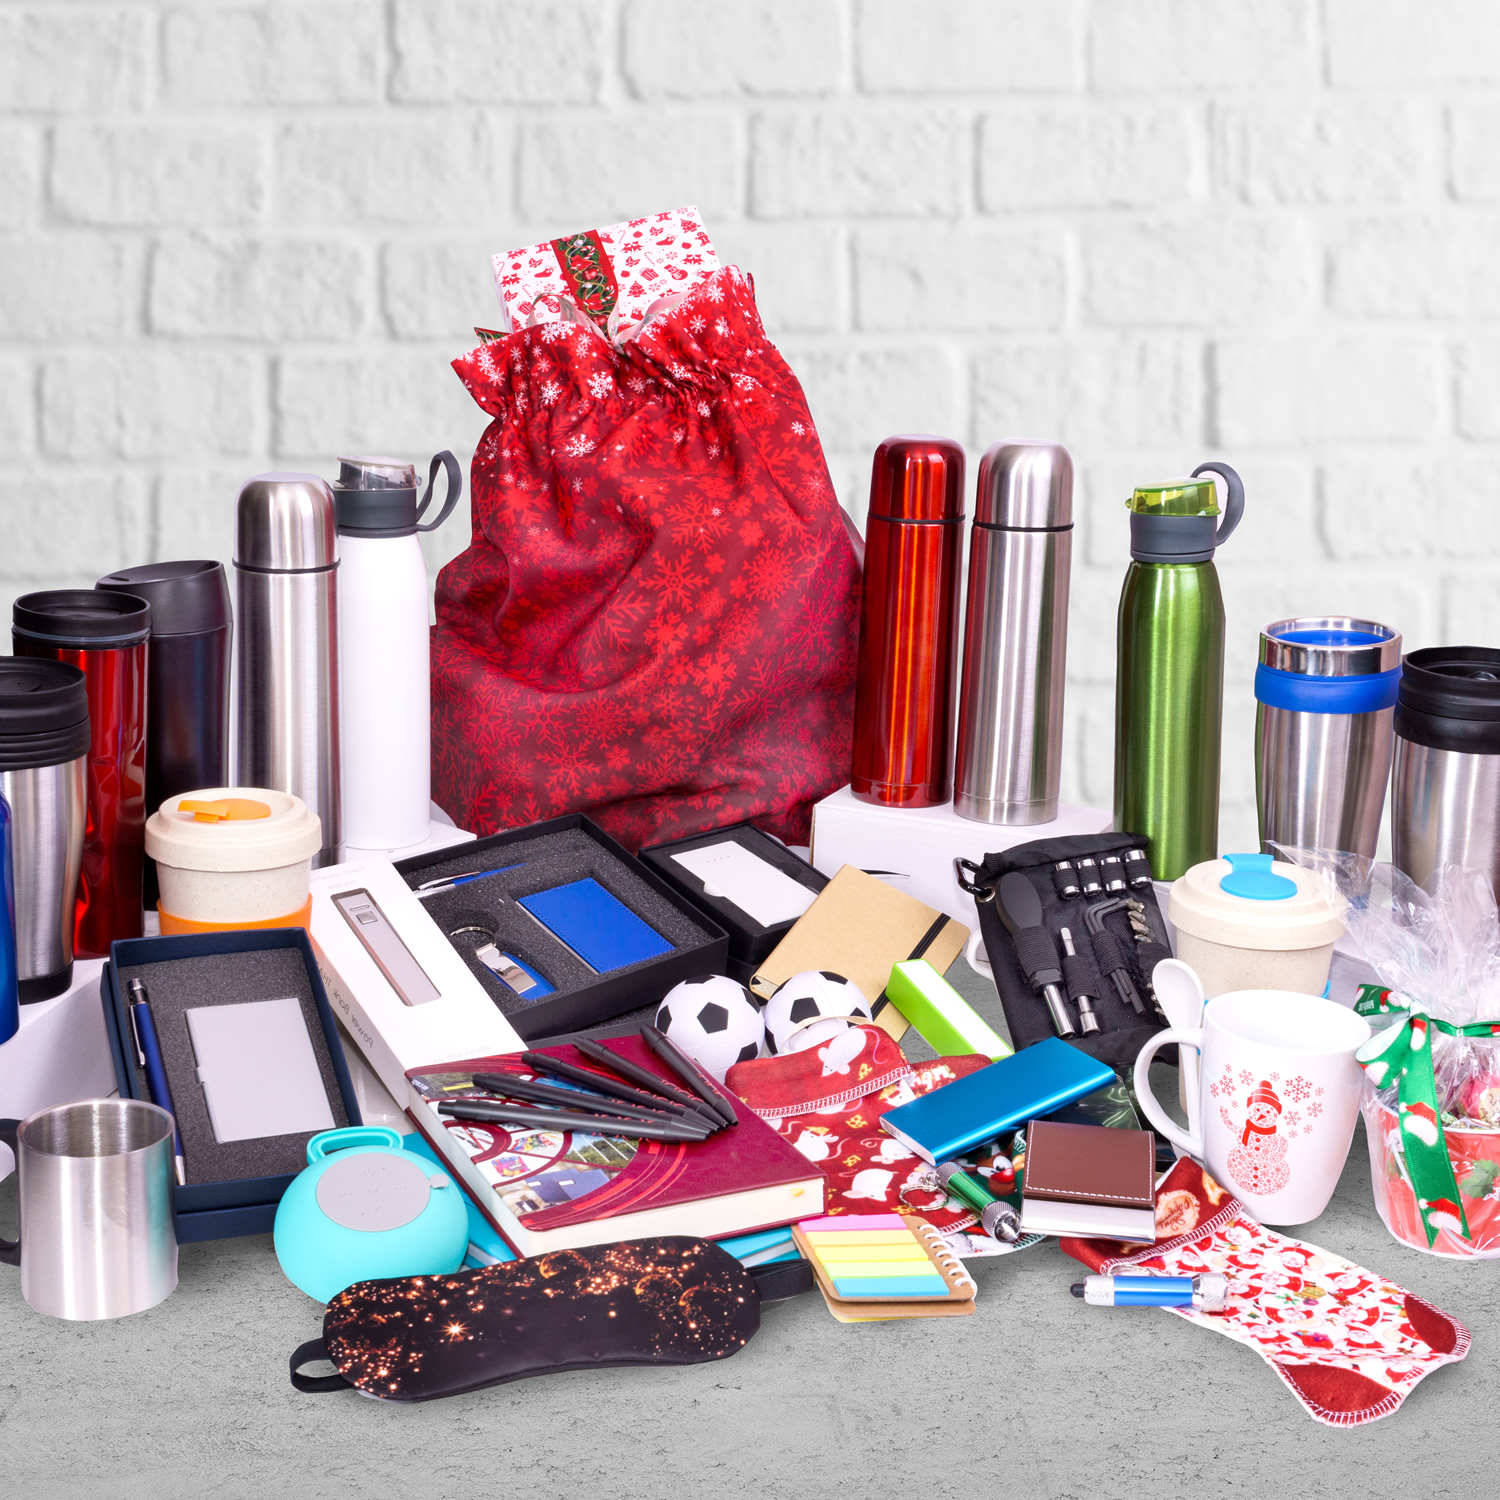 A collection of various items including thermoses, notebooks, pens, water bottles, soccer balls, toolkits, and gift bags displayed against a white brick background highlights the seamless logistics needed for warehouse fulfillment.